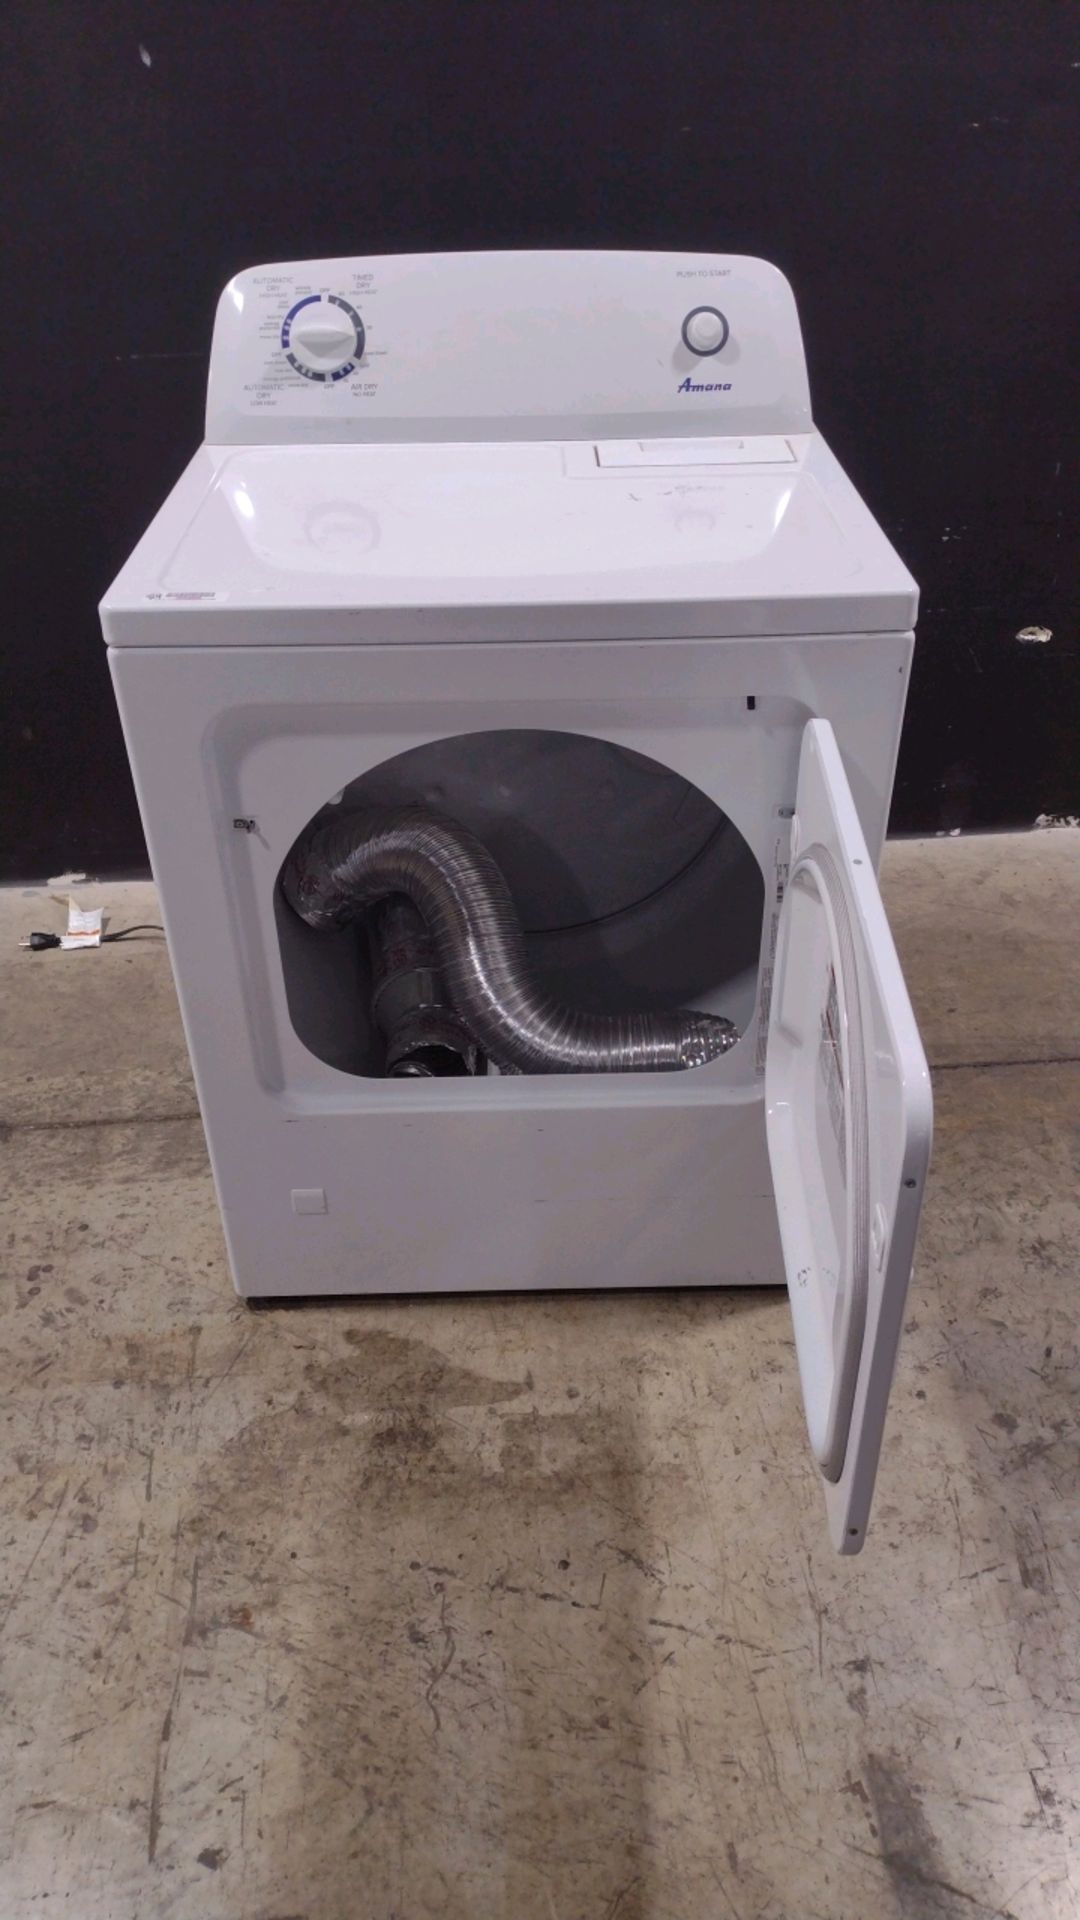 AMANA NGD4655EW2 DRYER MACHINE (LOCATED AT 3325 MOUNT PROSPECT ROAD, FRANKLIN PARK, IL, 60131) - Image 2 of 2